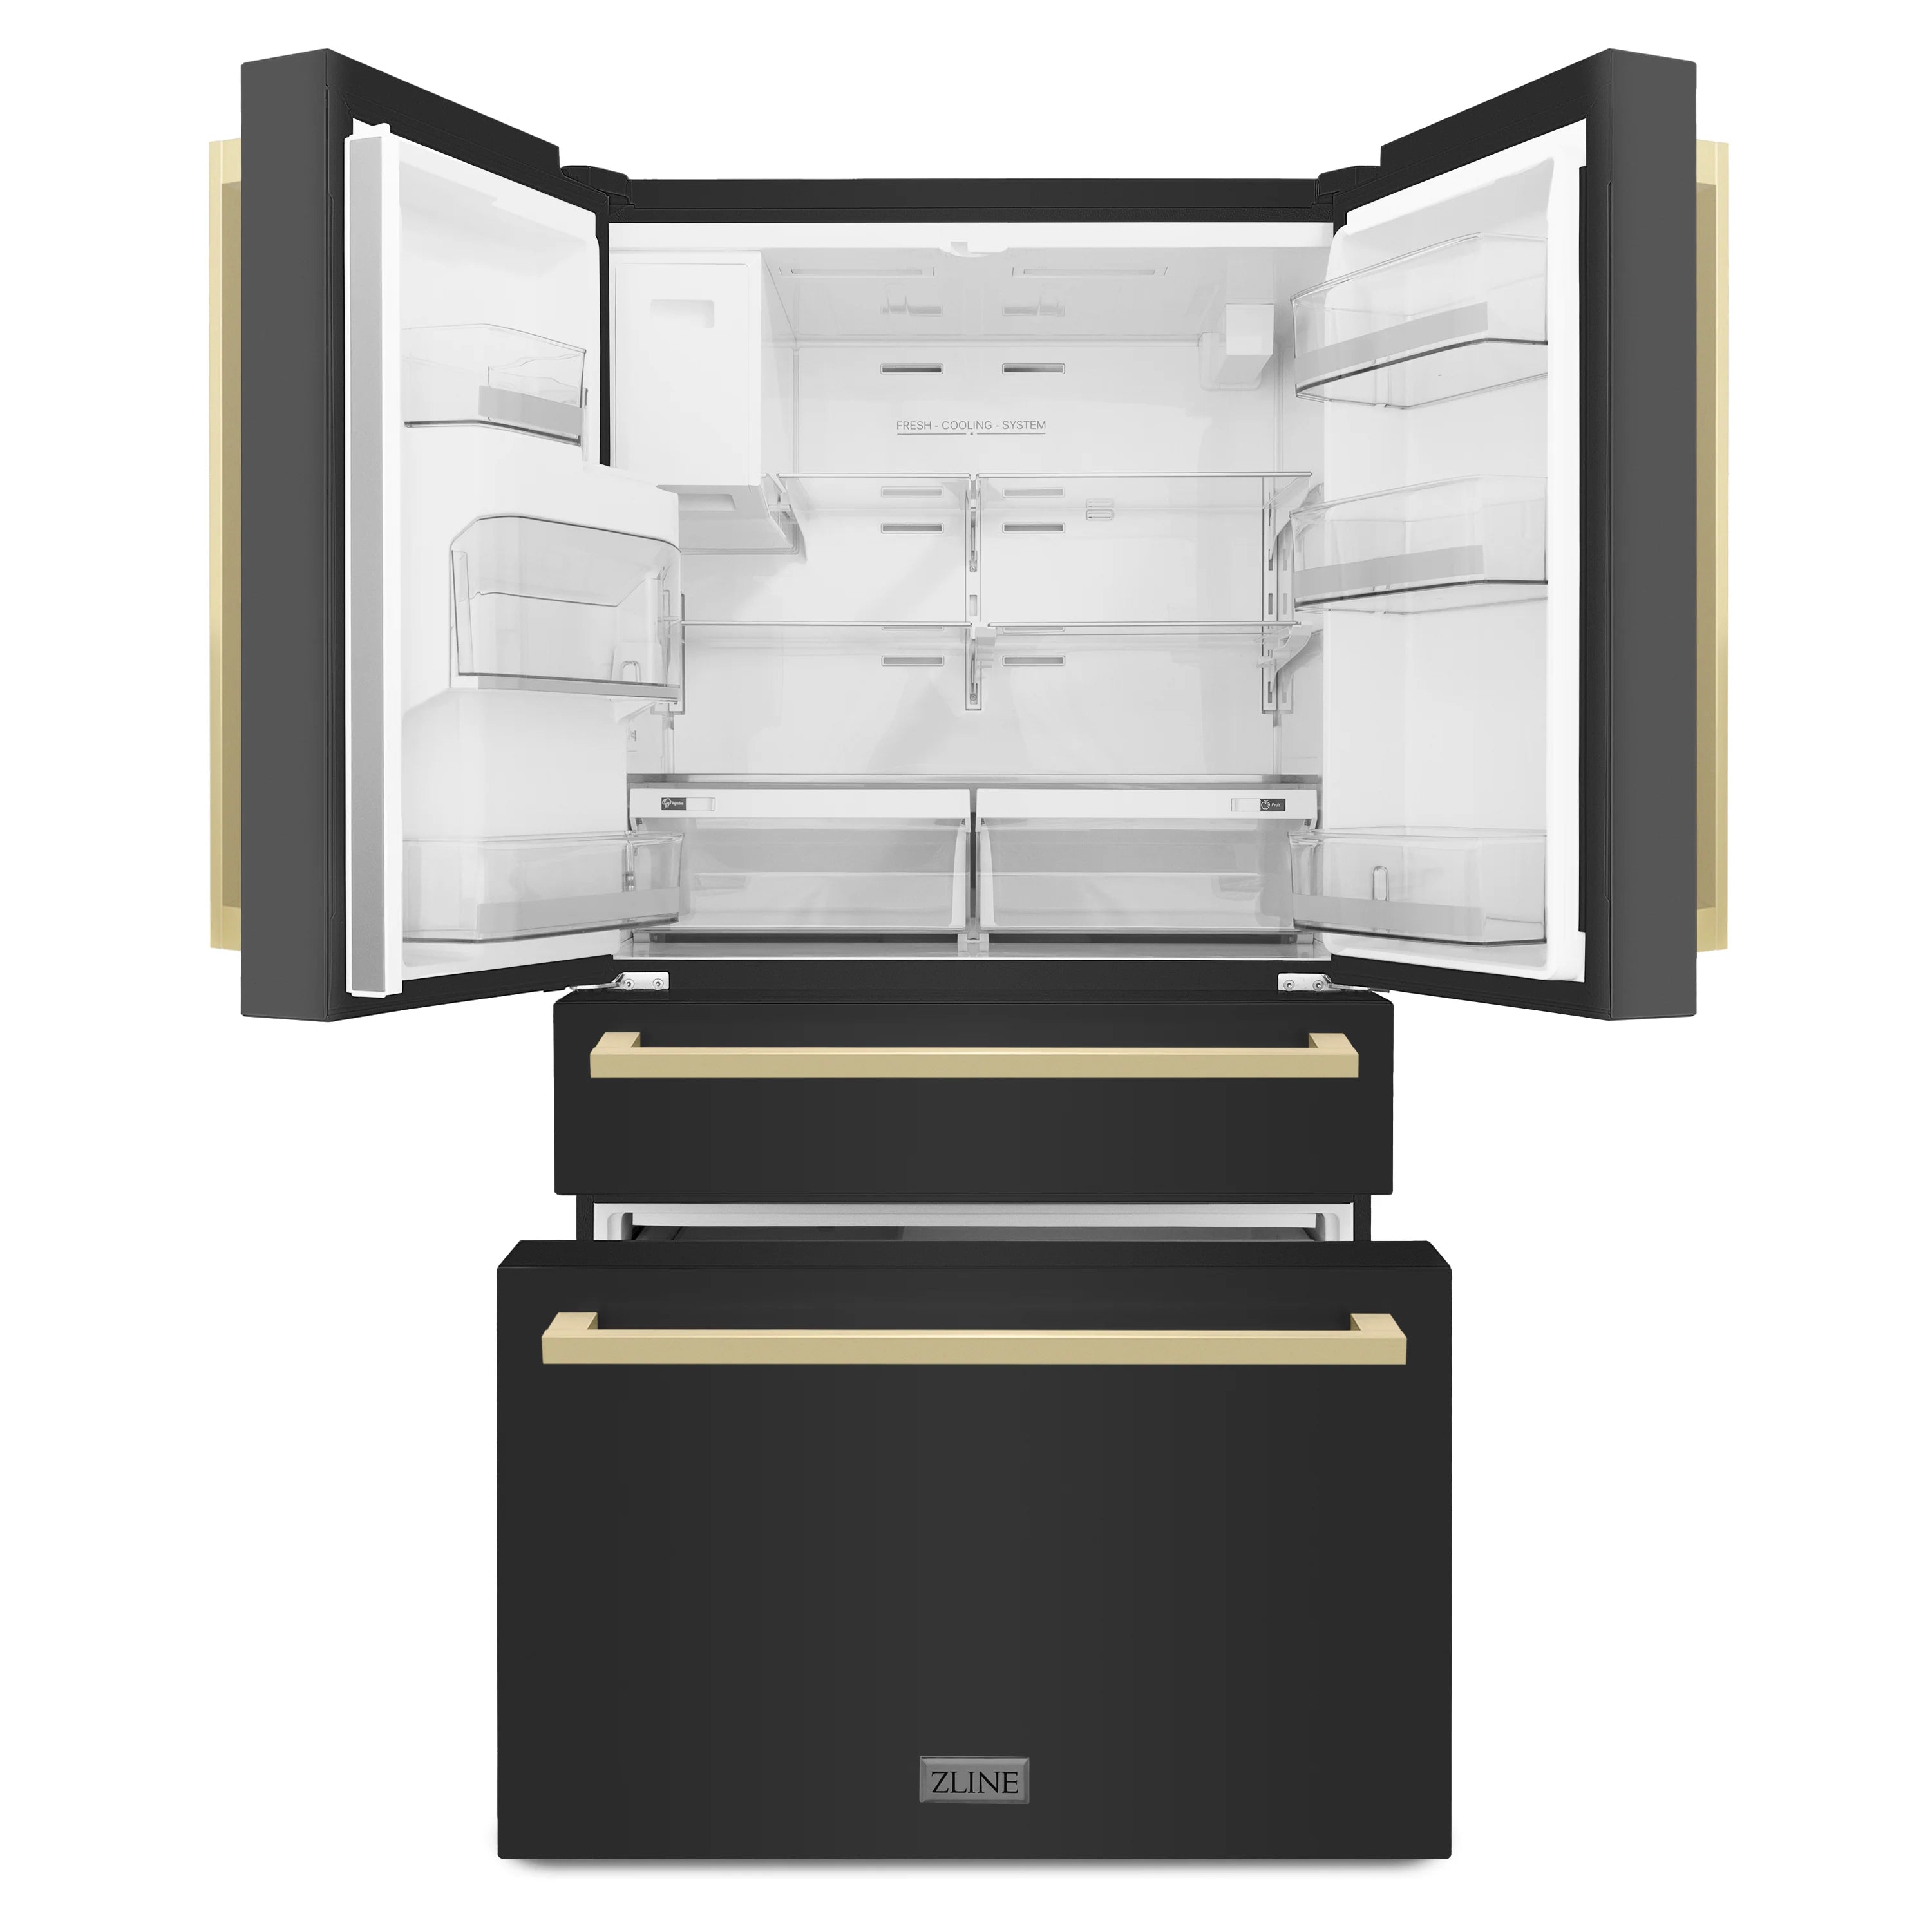 ZLINE 36" Autograph Edition 21.6 cu. ft 4-Door French Door Refrigerator with Water and Ice Dispenser in Black Stainless Steel with Champagne Bronze Square Handles (RFMZ-W36-BS-FCB)